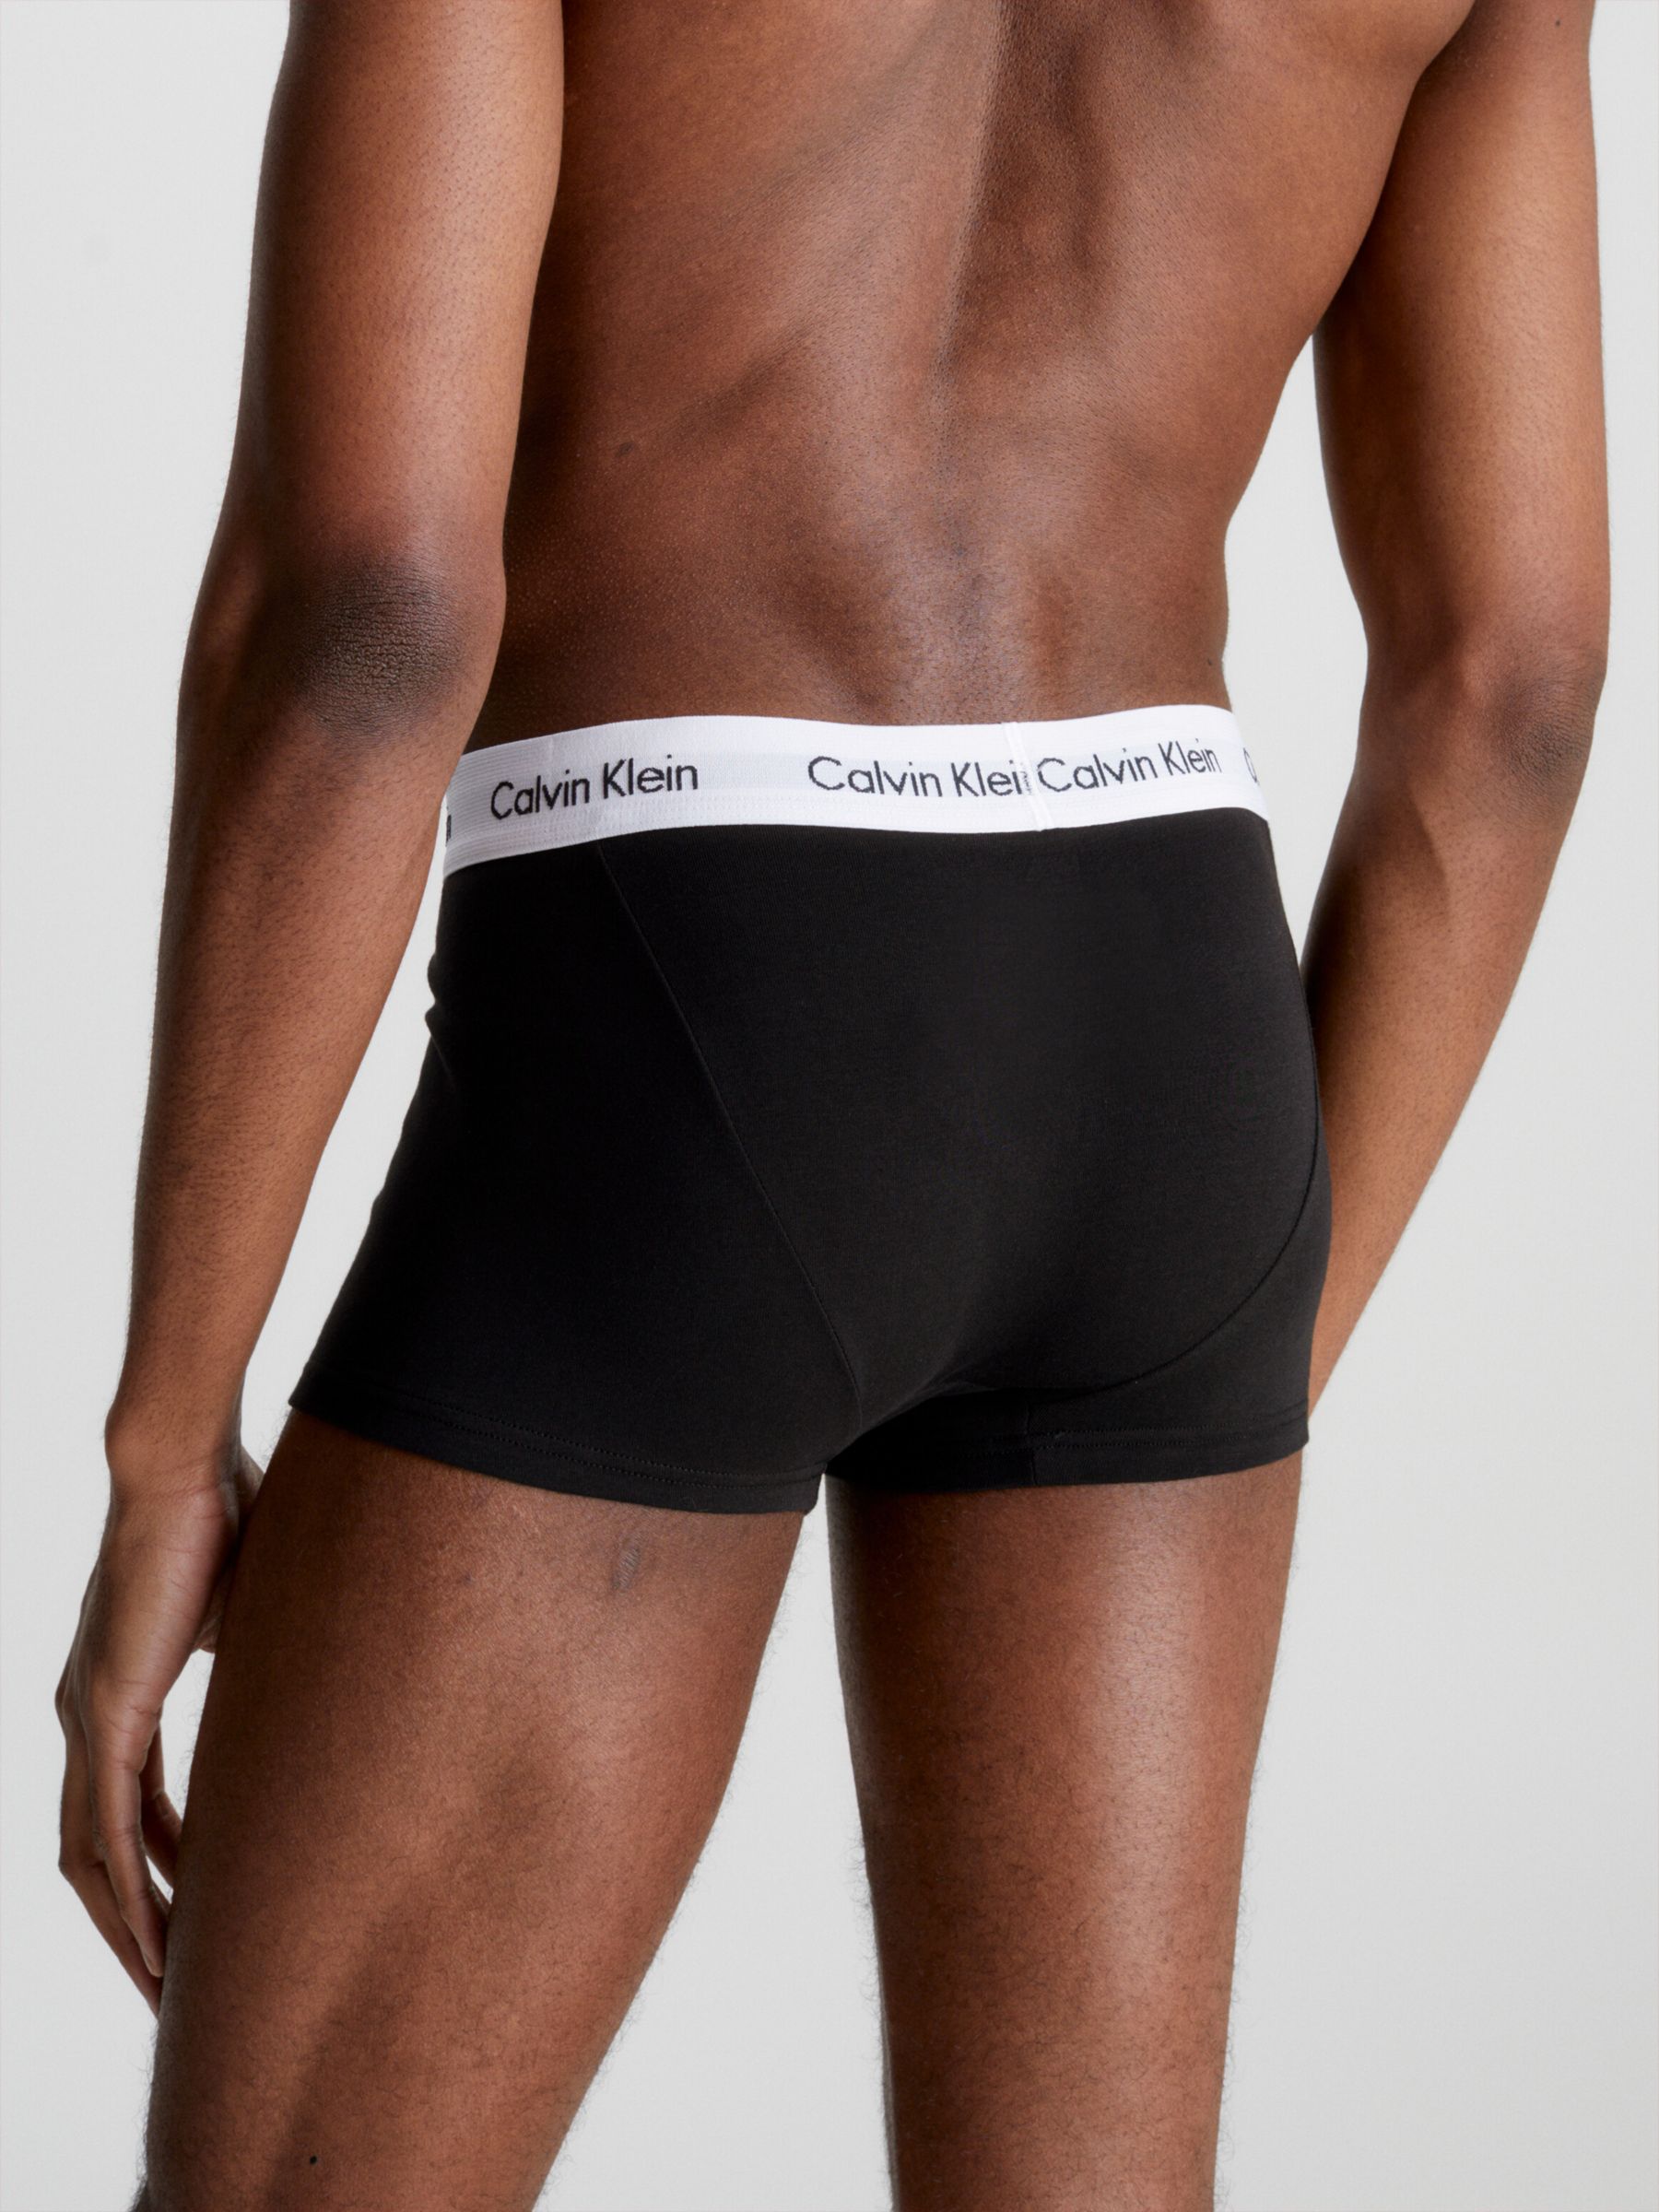 Calvin Klein Underwear LOW RISE TRUNK 3 PACK HOLIDAY - Pants